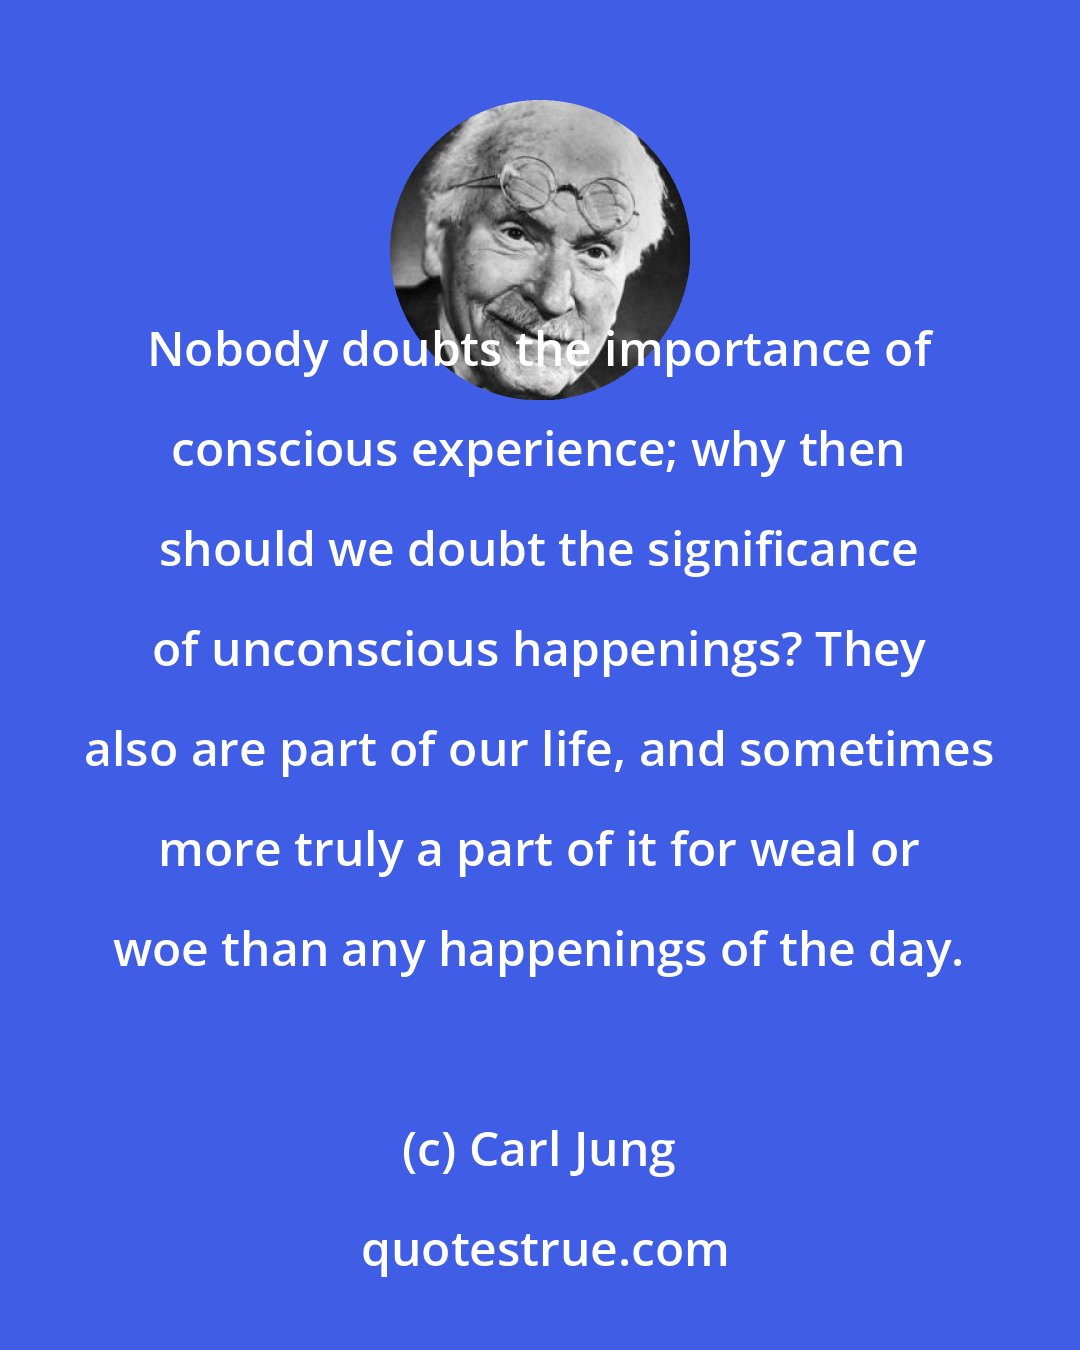 Carl Jung: Nobody doubts the importance of conscious experience; why then should we doubt the significance of unconscious happenings? They also are part of our life, and sometimes more truly a part of it for weal or woe than any happenings of the day.